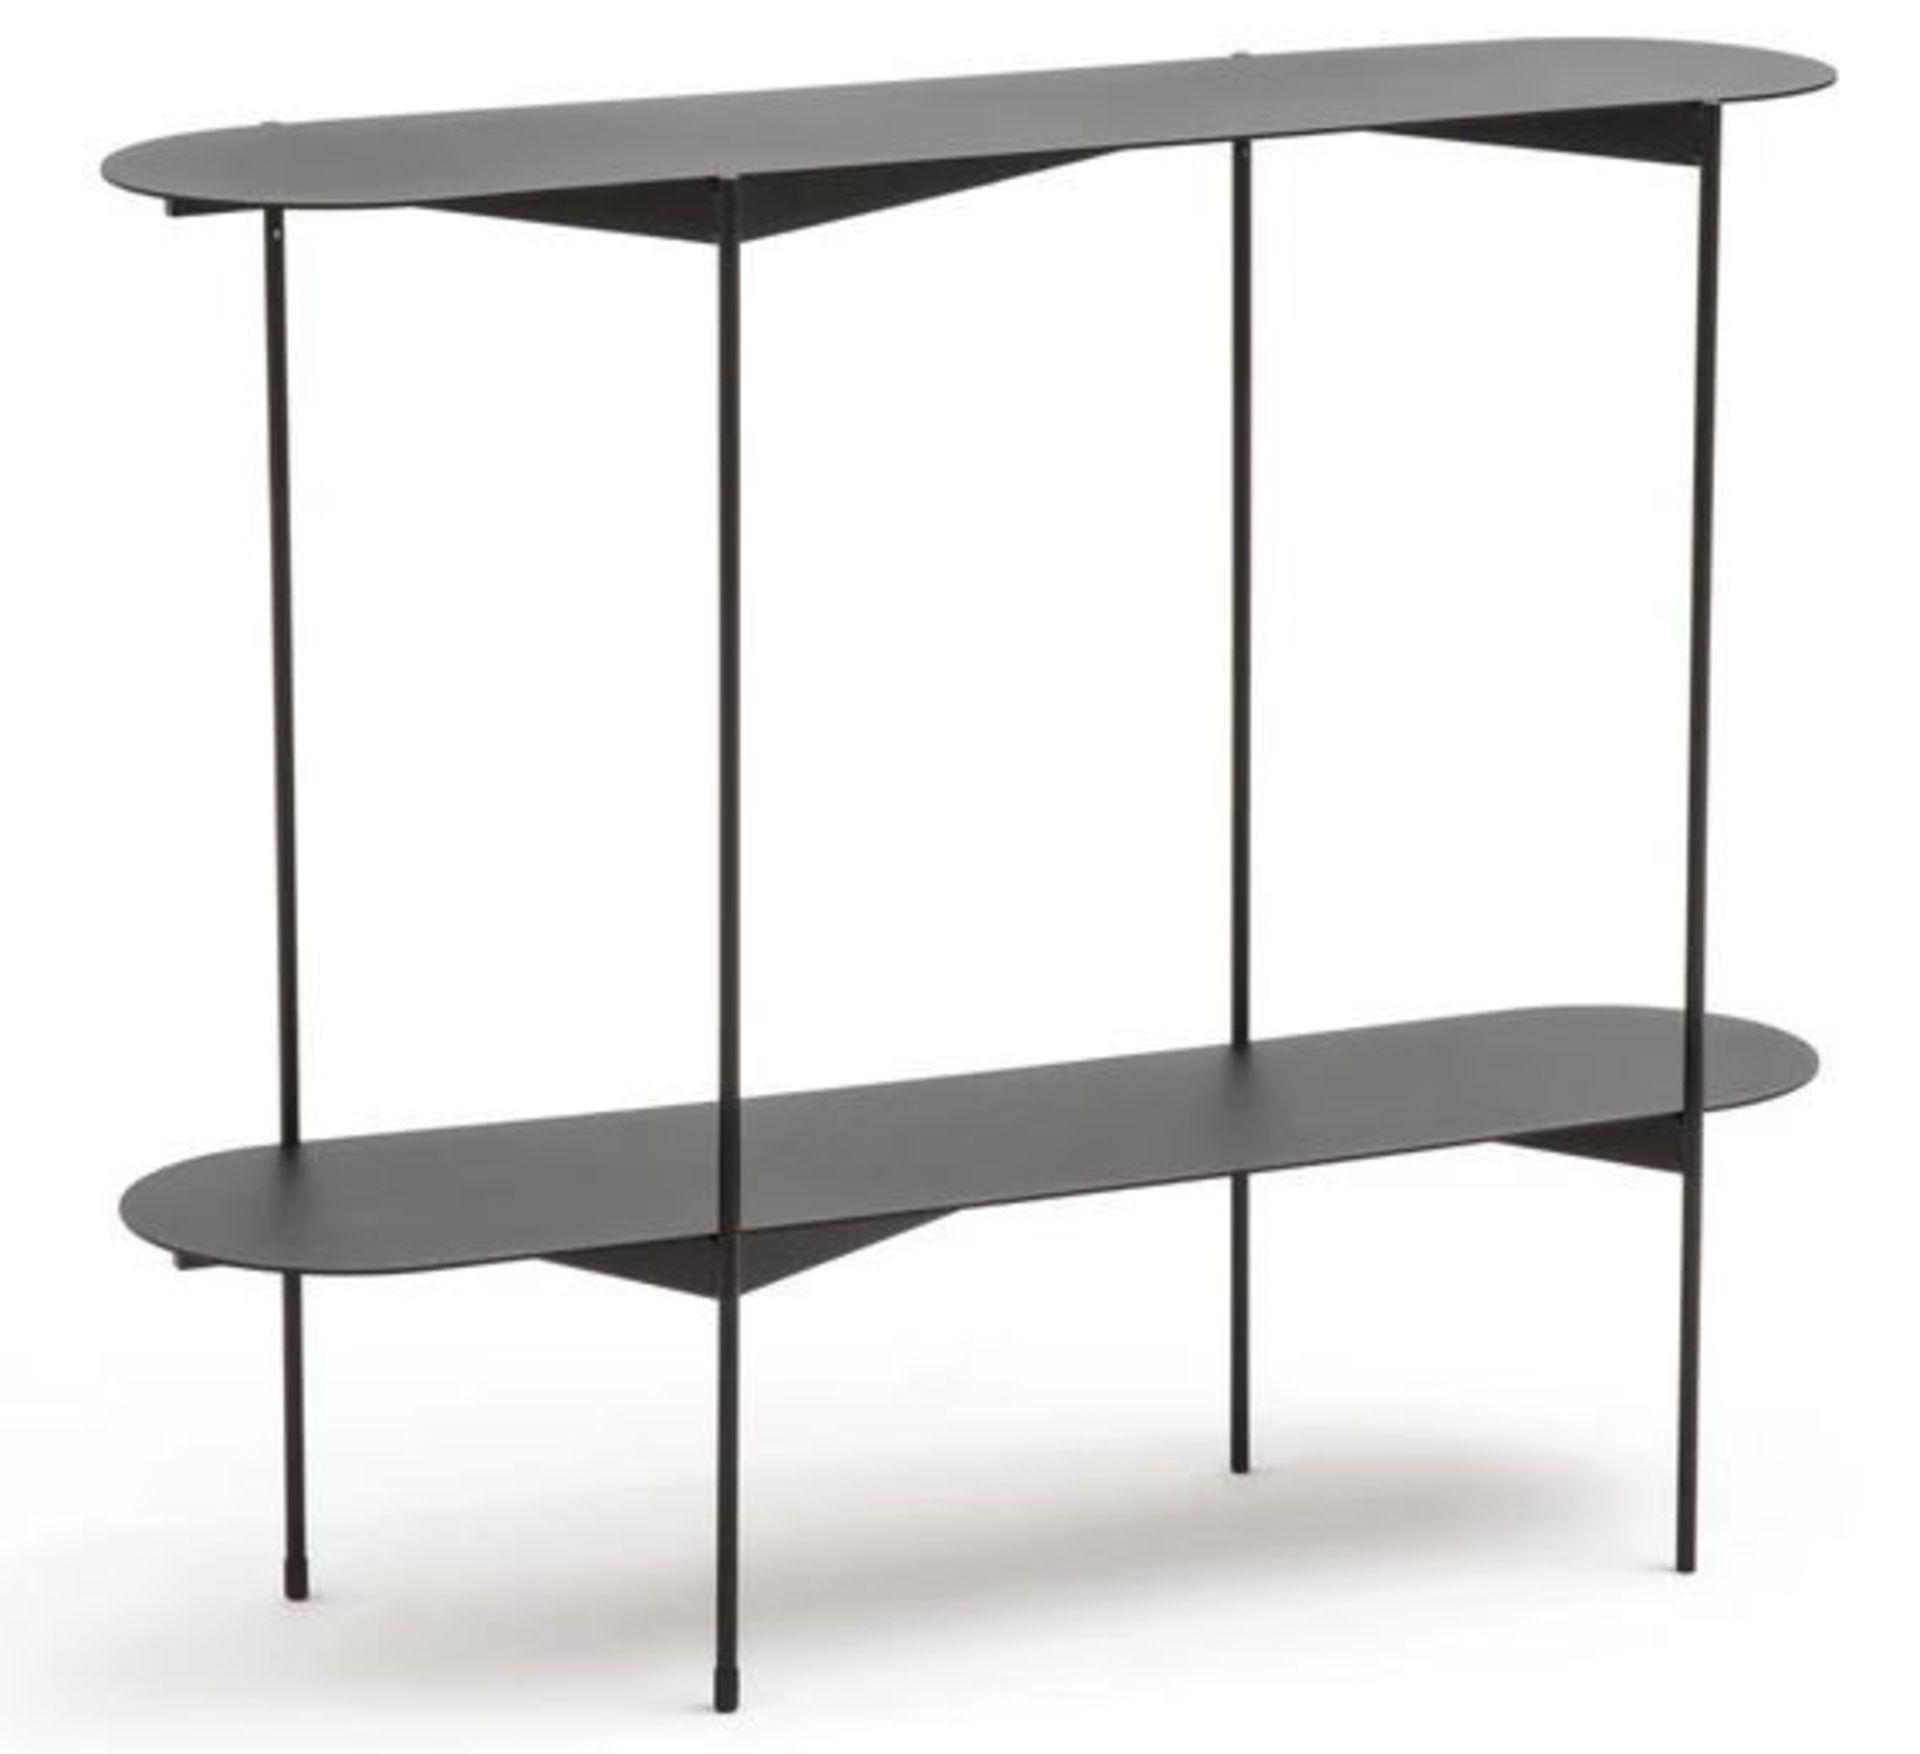 1 GRADE A BOXED DESIGNER OBLONE METAL CONSOLE TABLE IN BLACK / RRP £190.00 (PUBLIC VIEWING